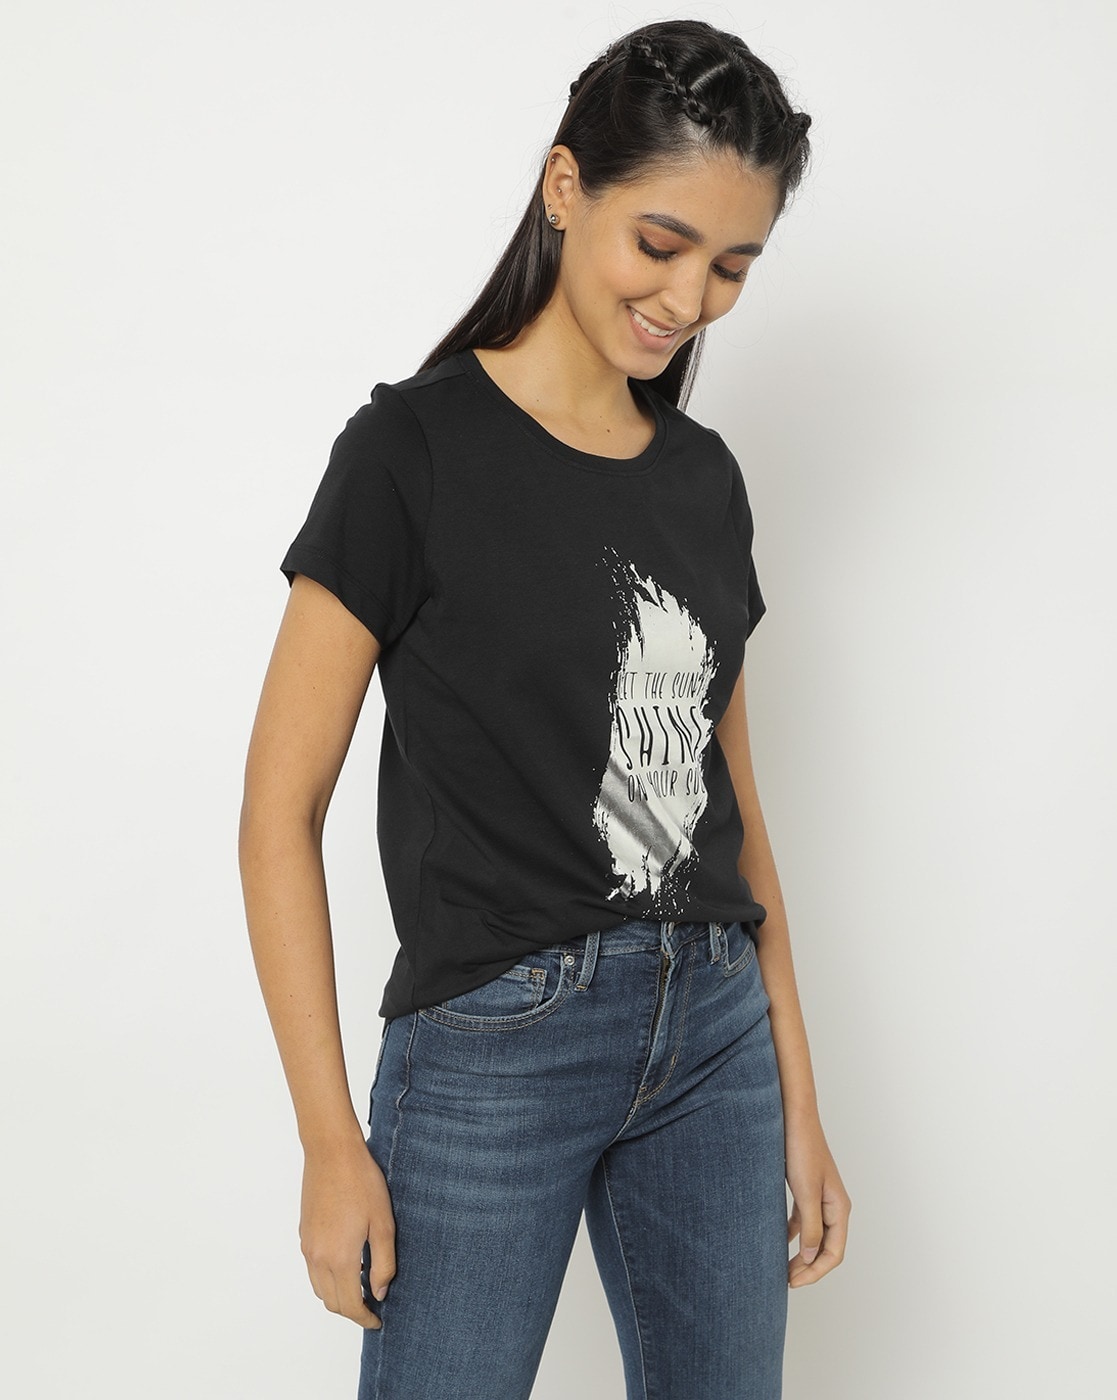 Buy Black Tshirts for Women by DNMX Online